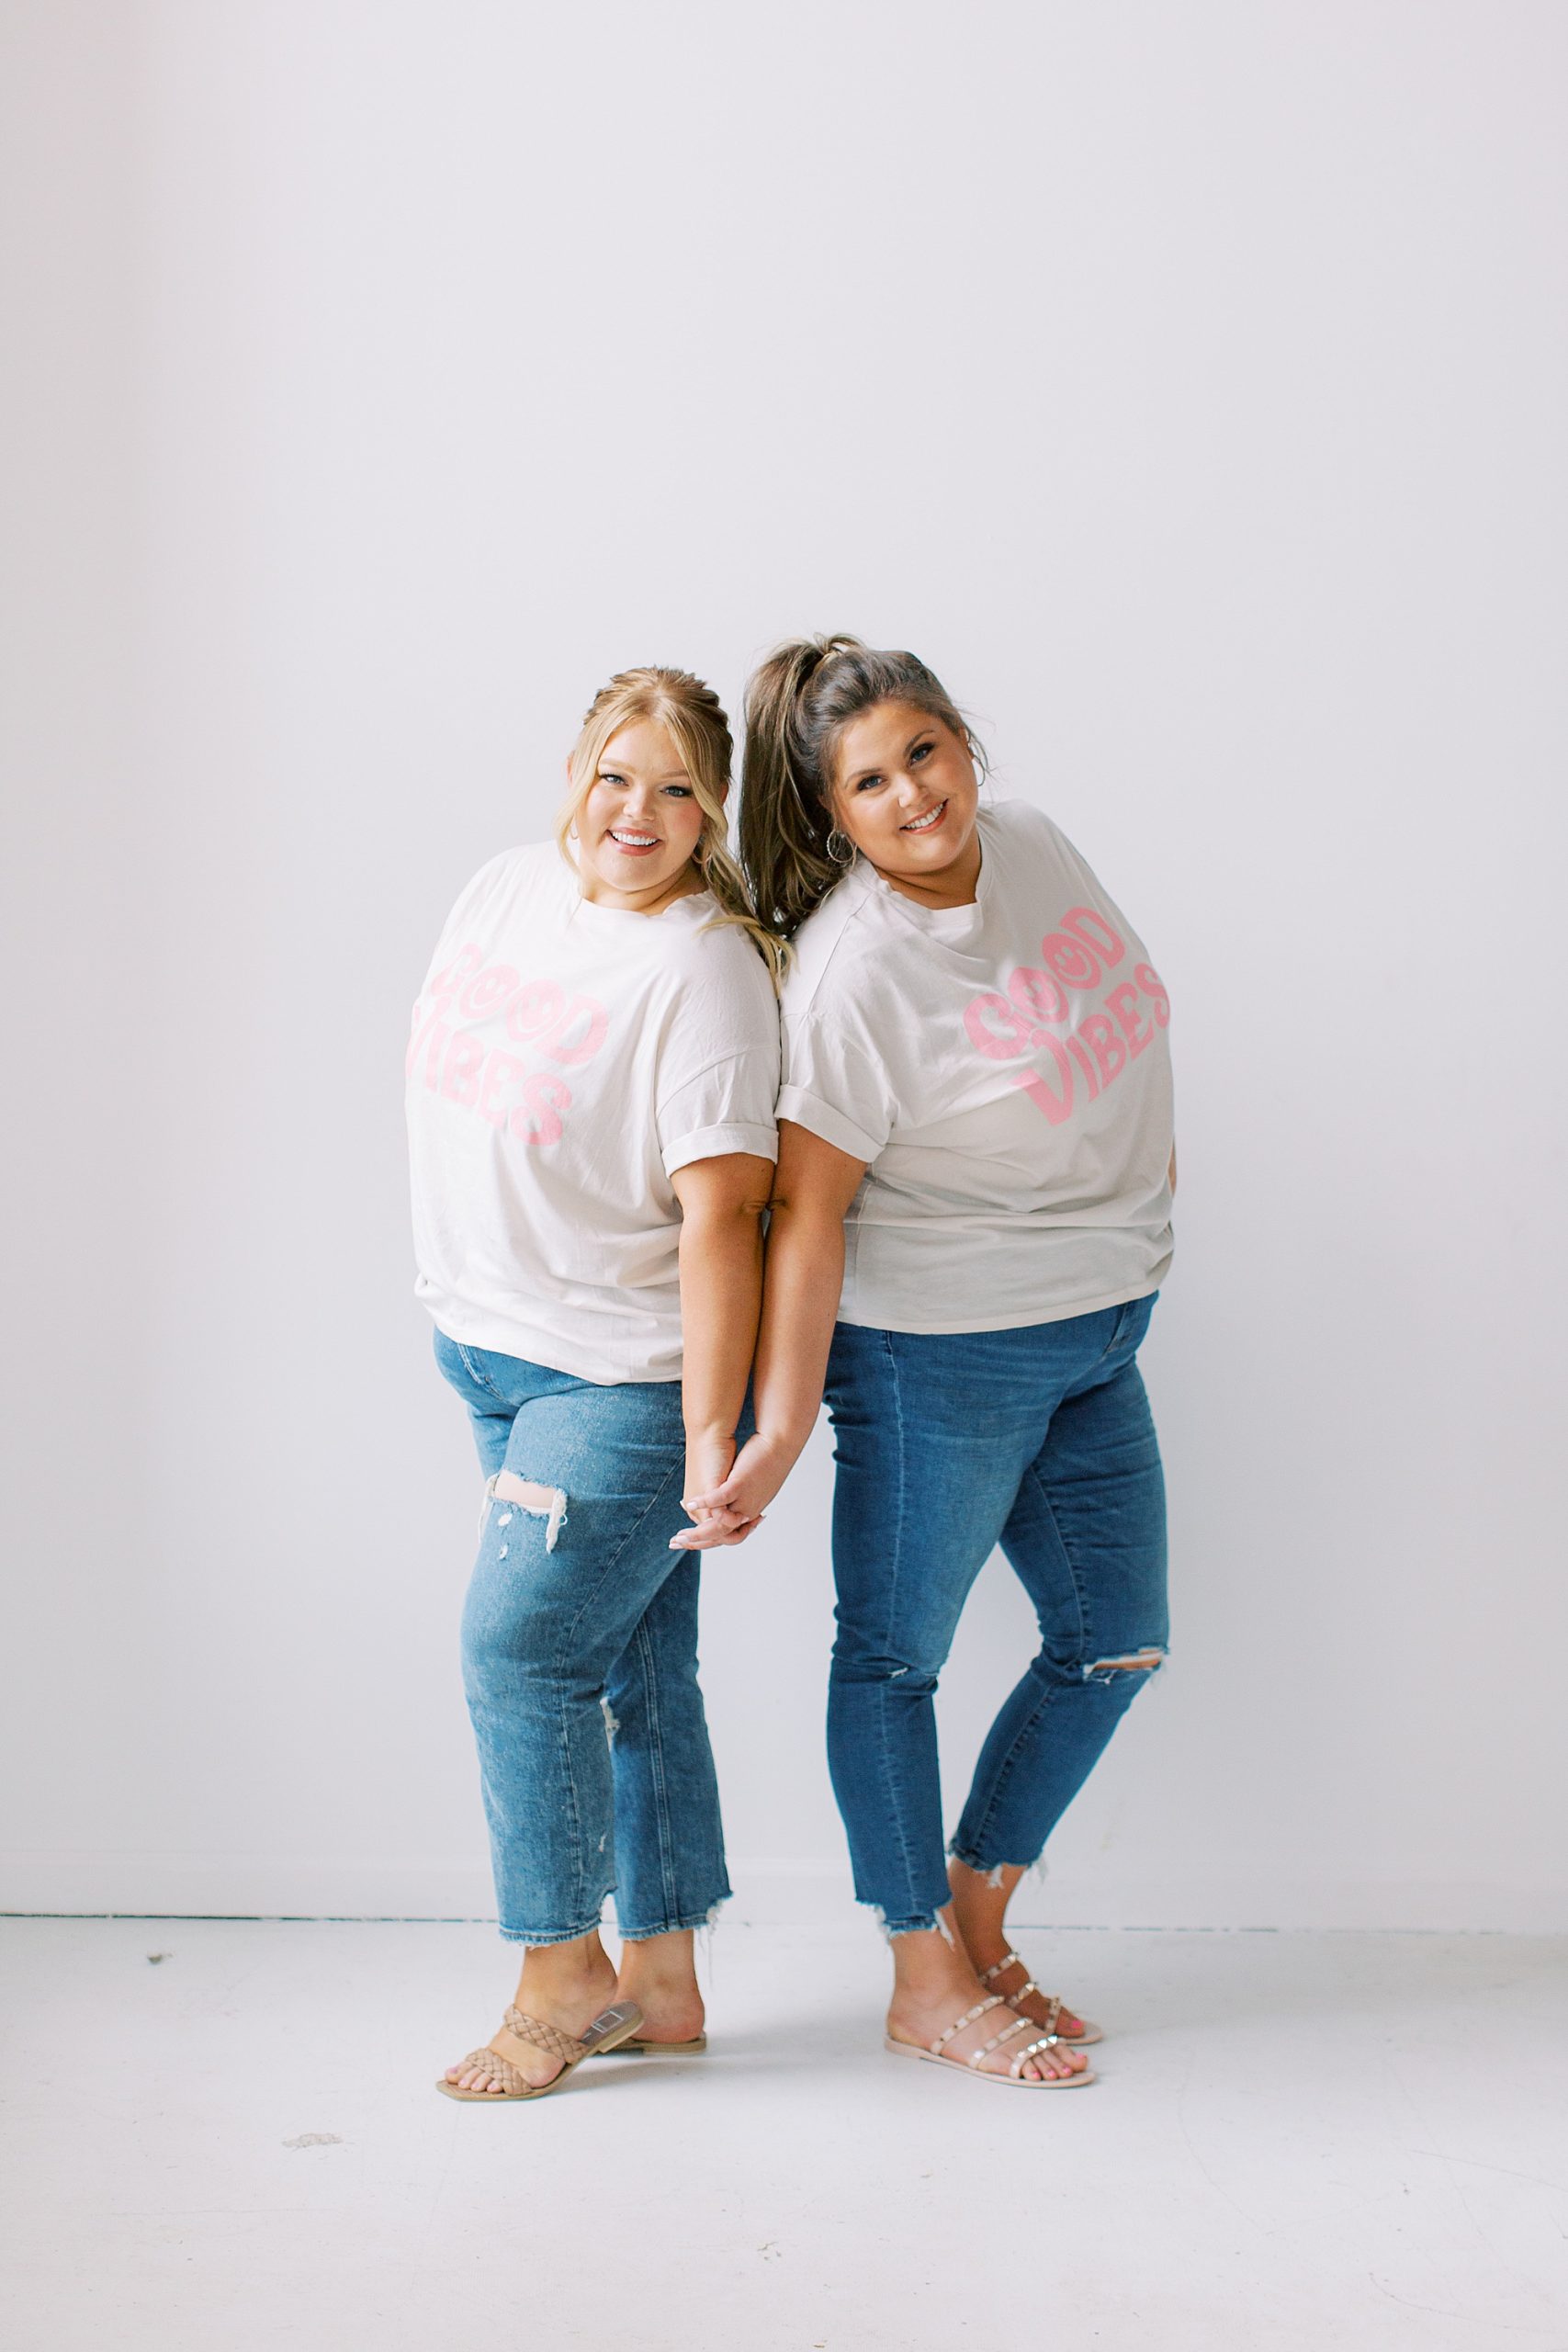 studio branding portraits for The Beauty Tribe in jeans and t-shirts